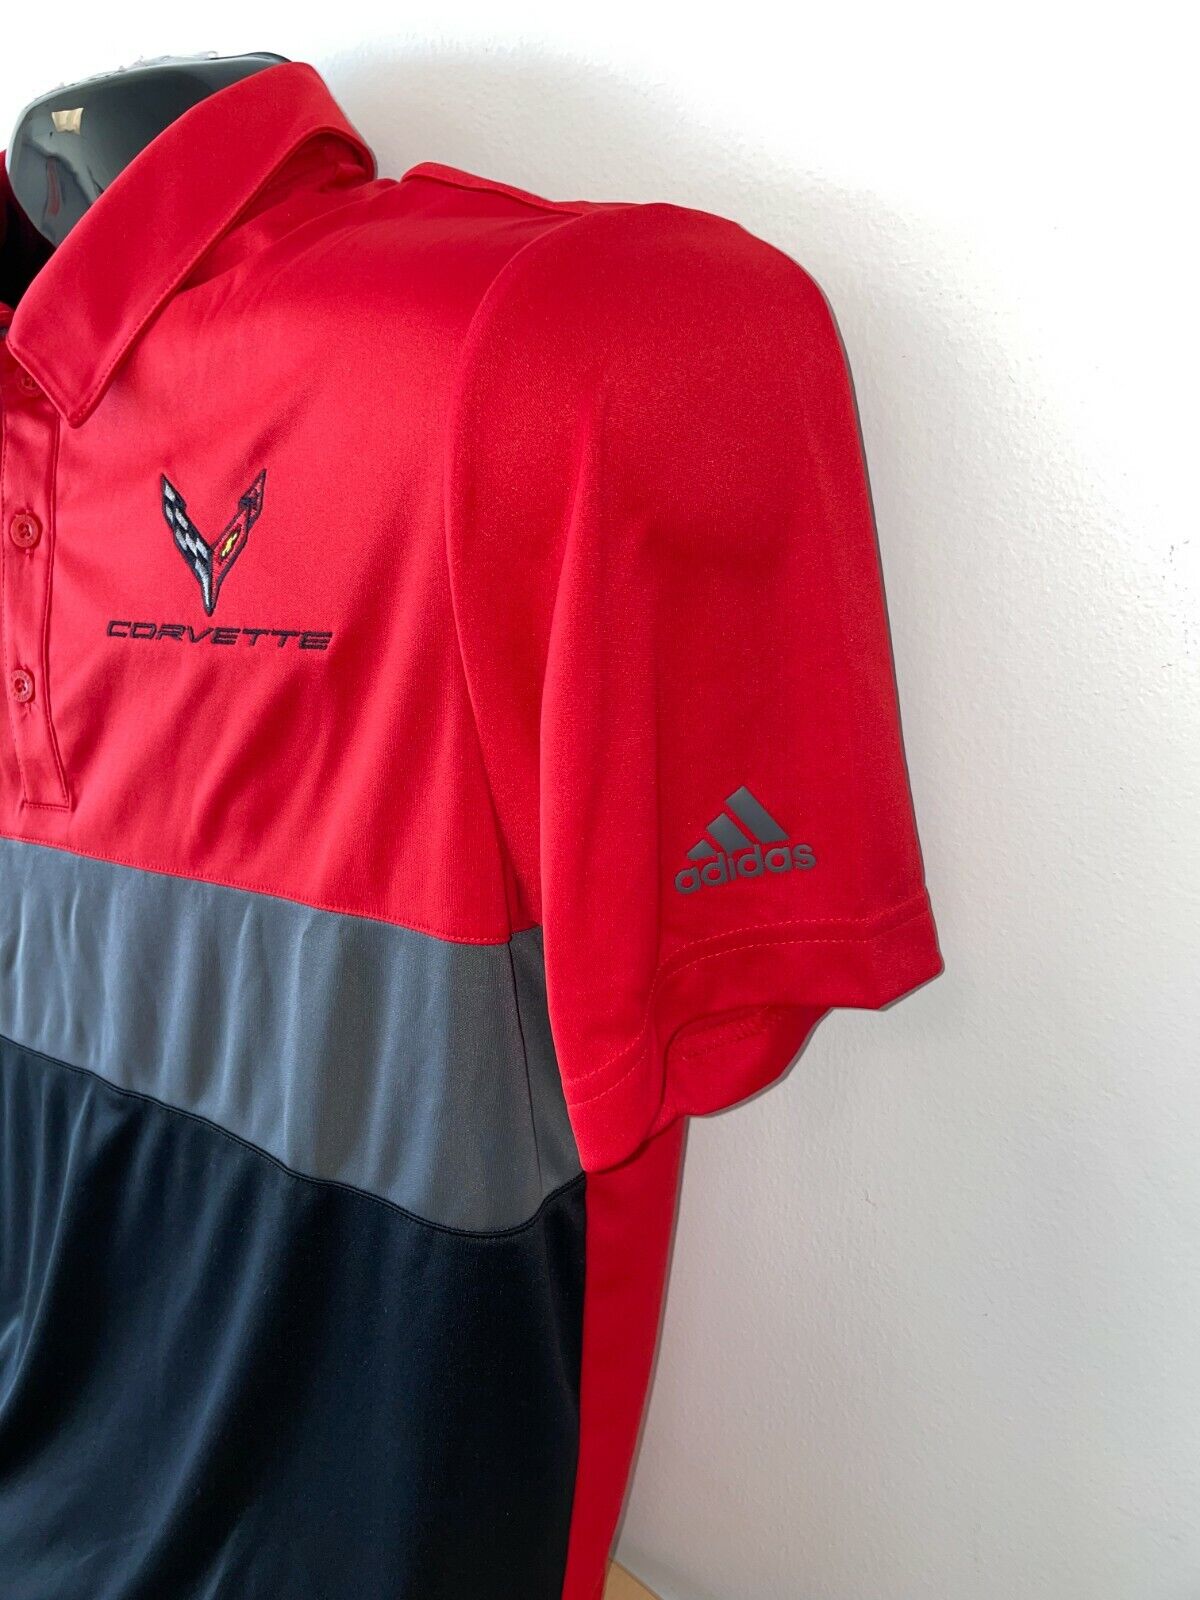 Corvette C8 Adidas Sport Polo T-Shirt Red, Black and Gray combined